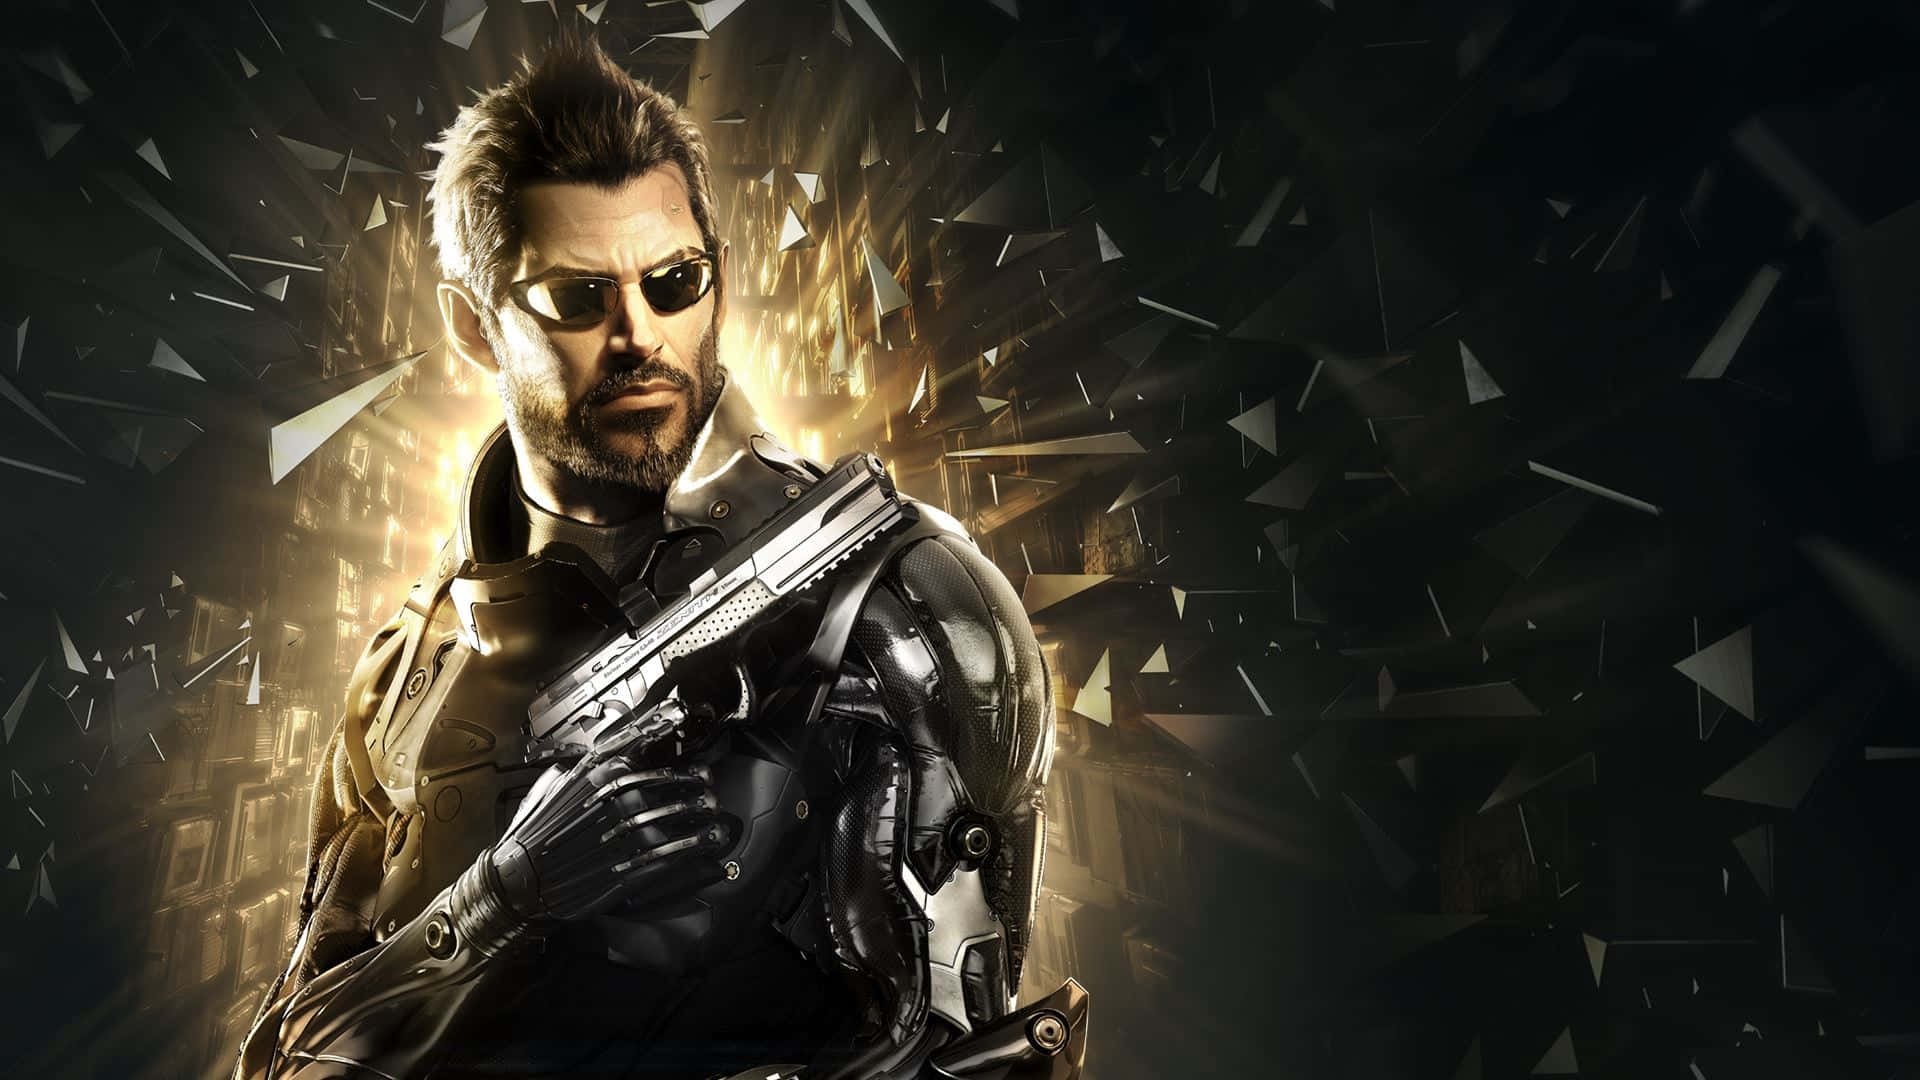 Mankind Divided - The Fate of Humanity Hangs in the Balance Wallpaper